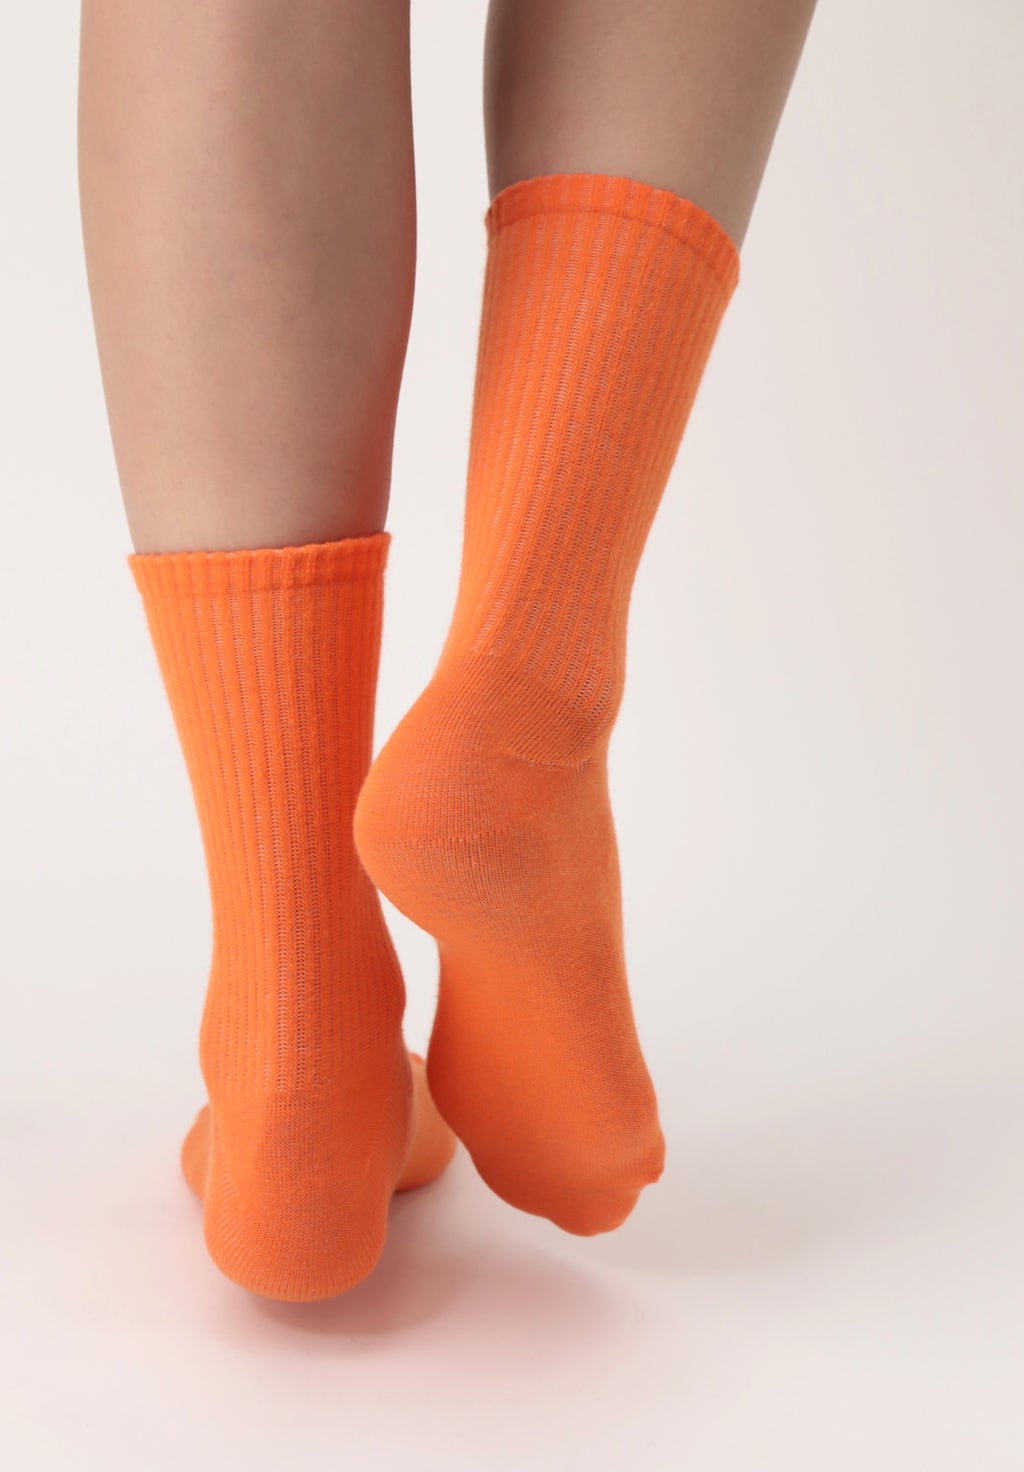 OroblÌ_ Color Block Twin Socks - Ribbed cotton mix bootie ankle high socks twin pack with shaped heel. One pair is white with orange, green, blue and pale pink lines on the back and the other is a plain bright bold orange colour.